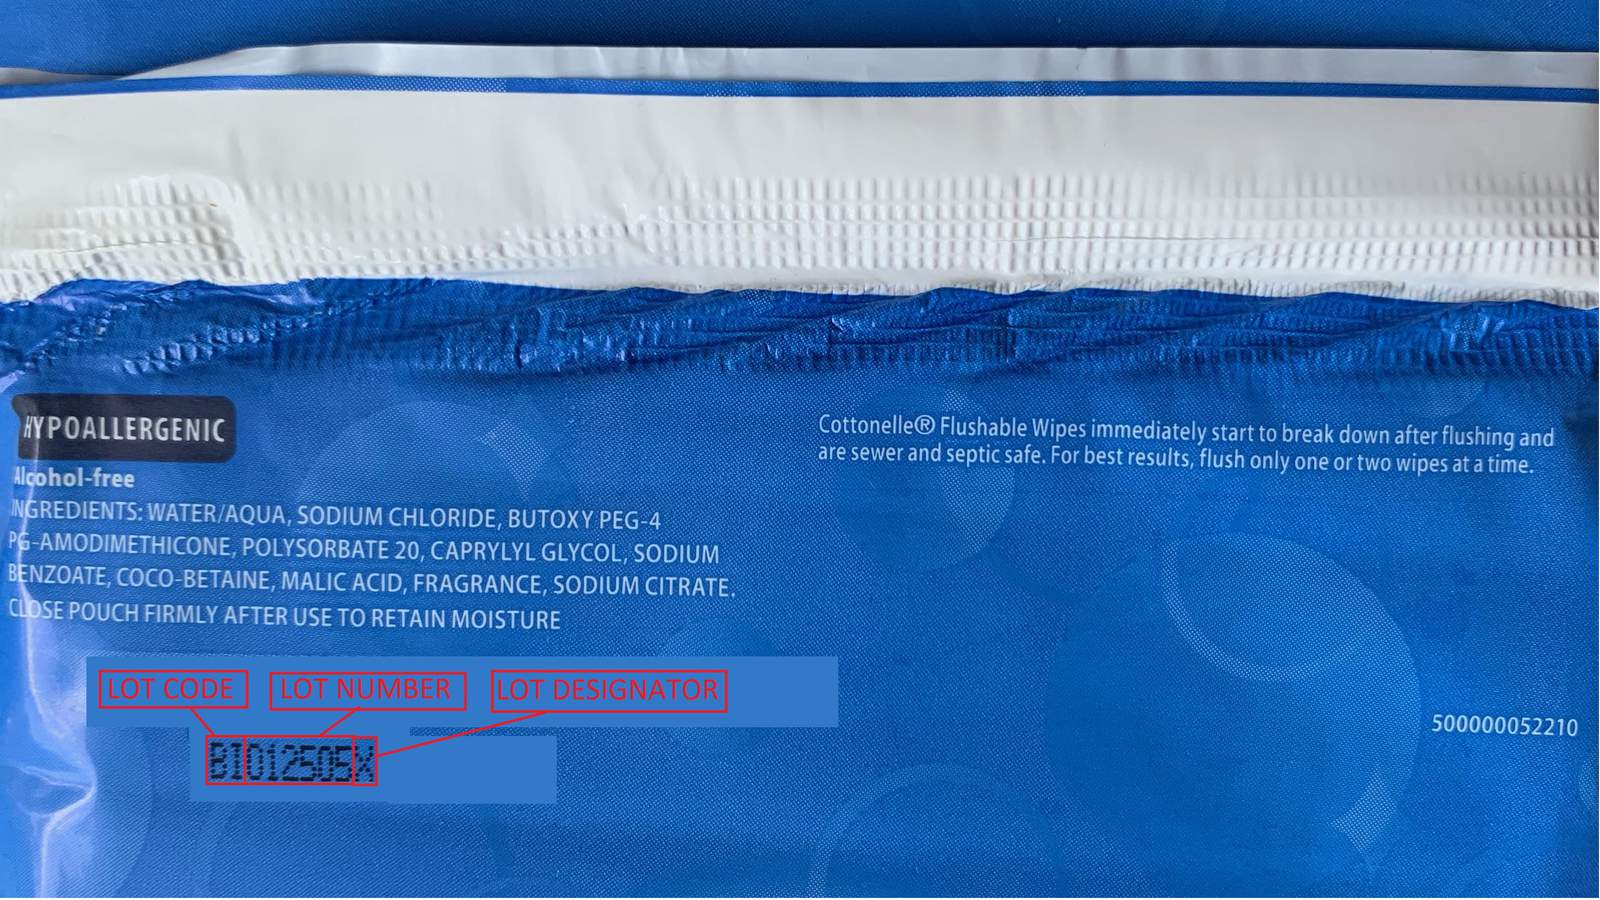 Cottonelle flushable wipes recalled due to possible bacterial contamination